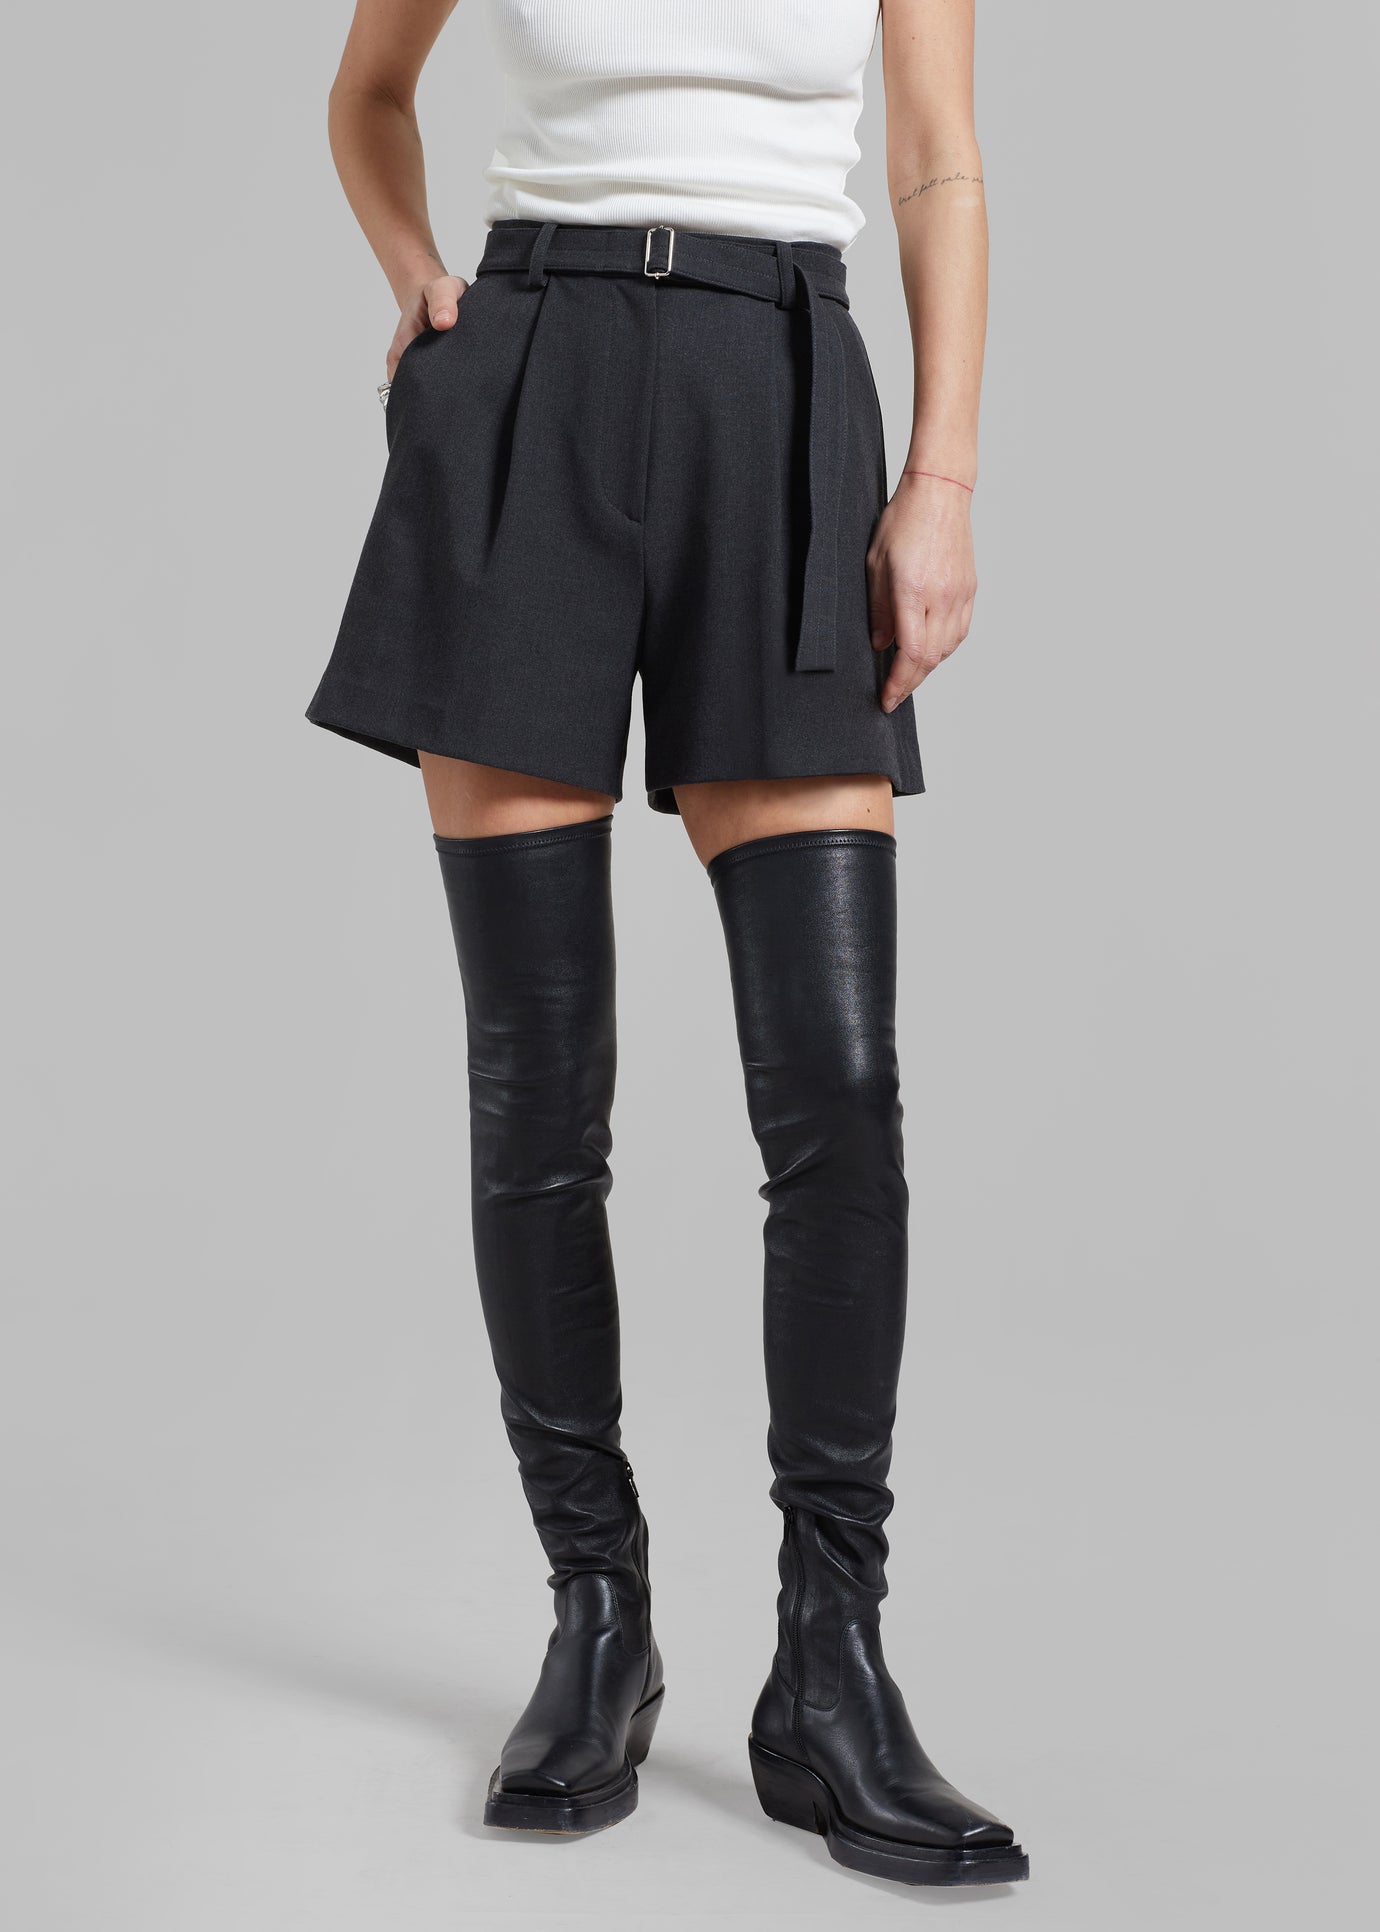 Avalon Belted Shorts - Charcoal - 1